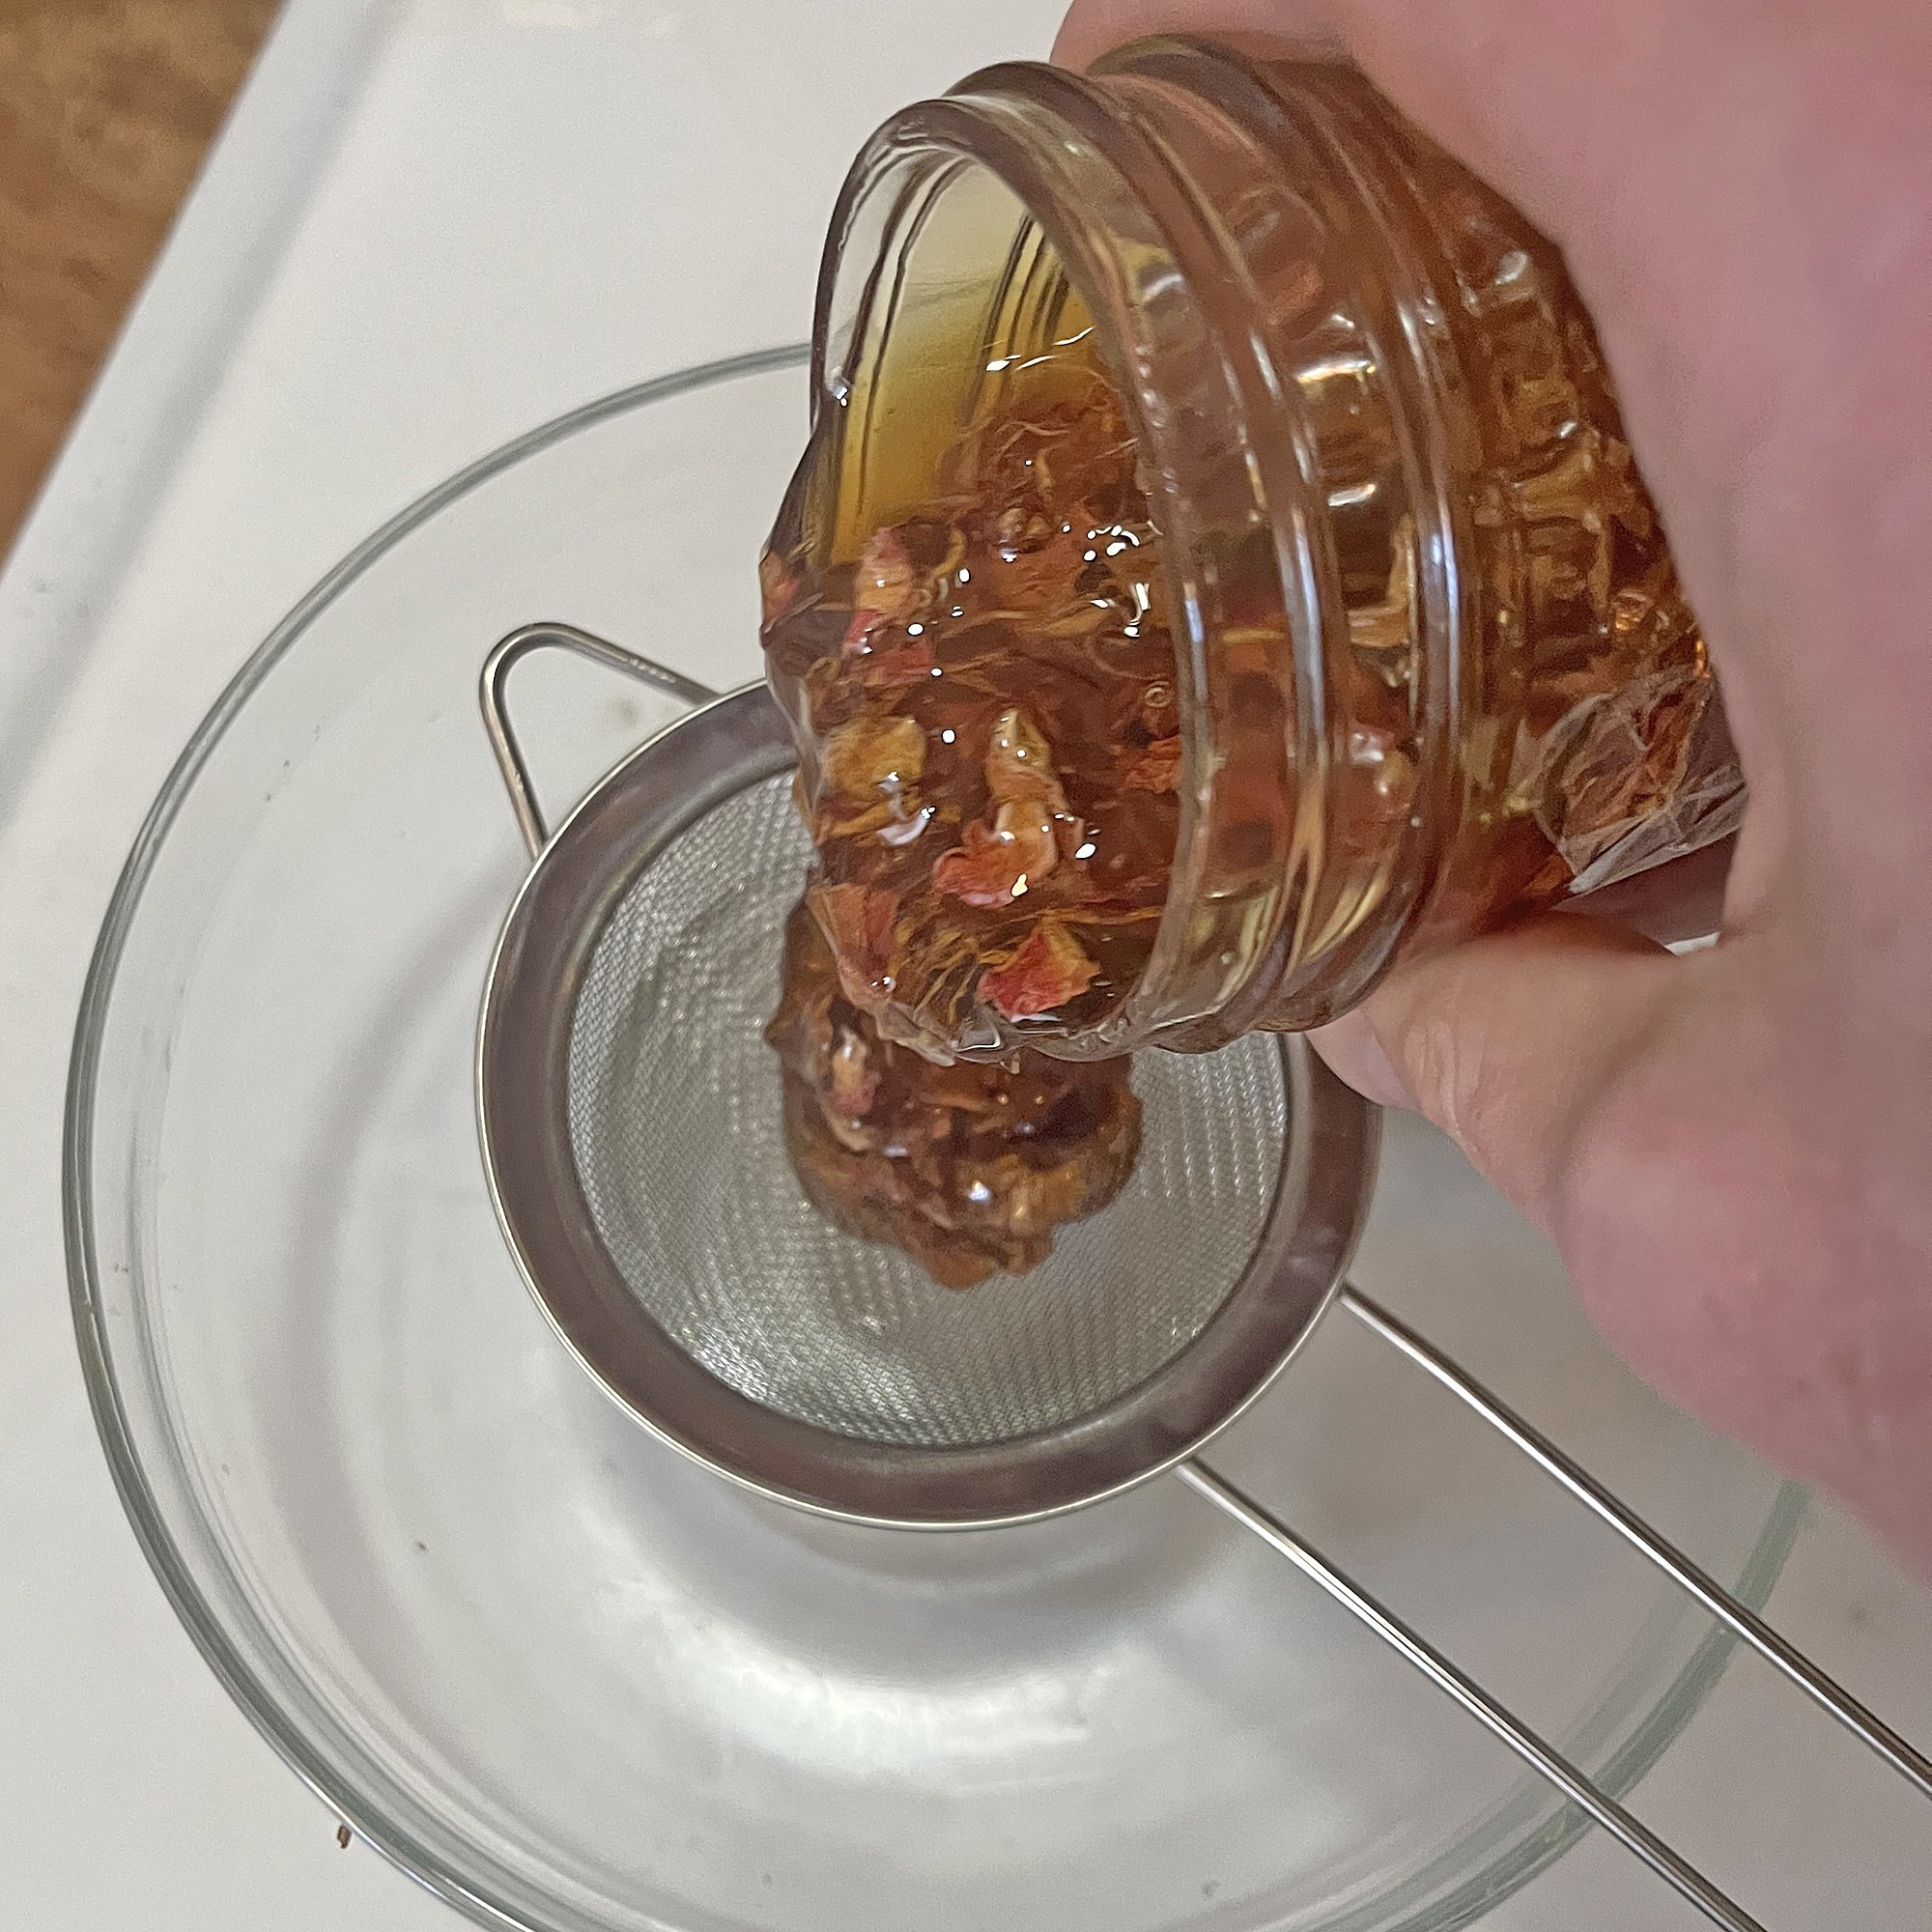 Set the strainer on top of the jar. Pour the honey into the strainer.